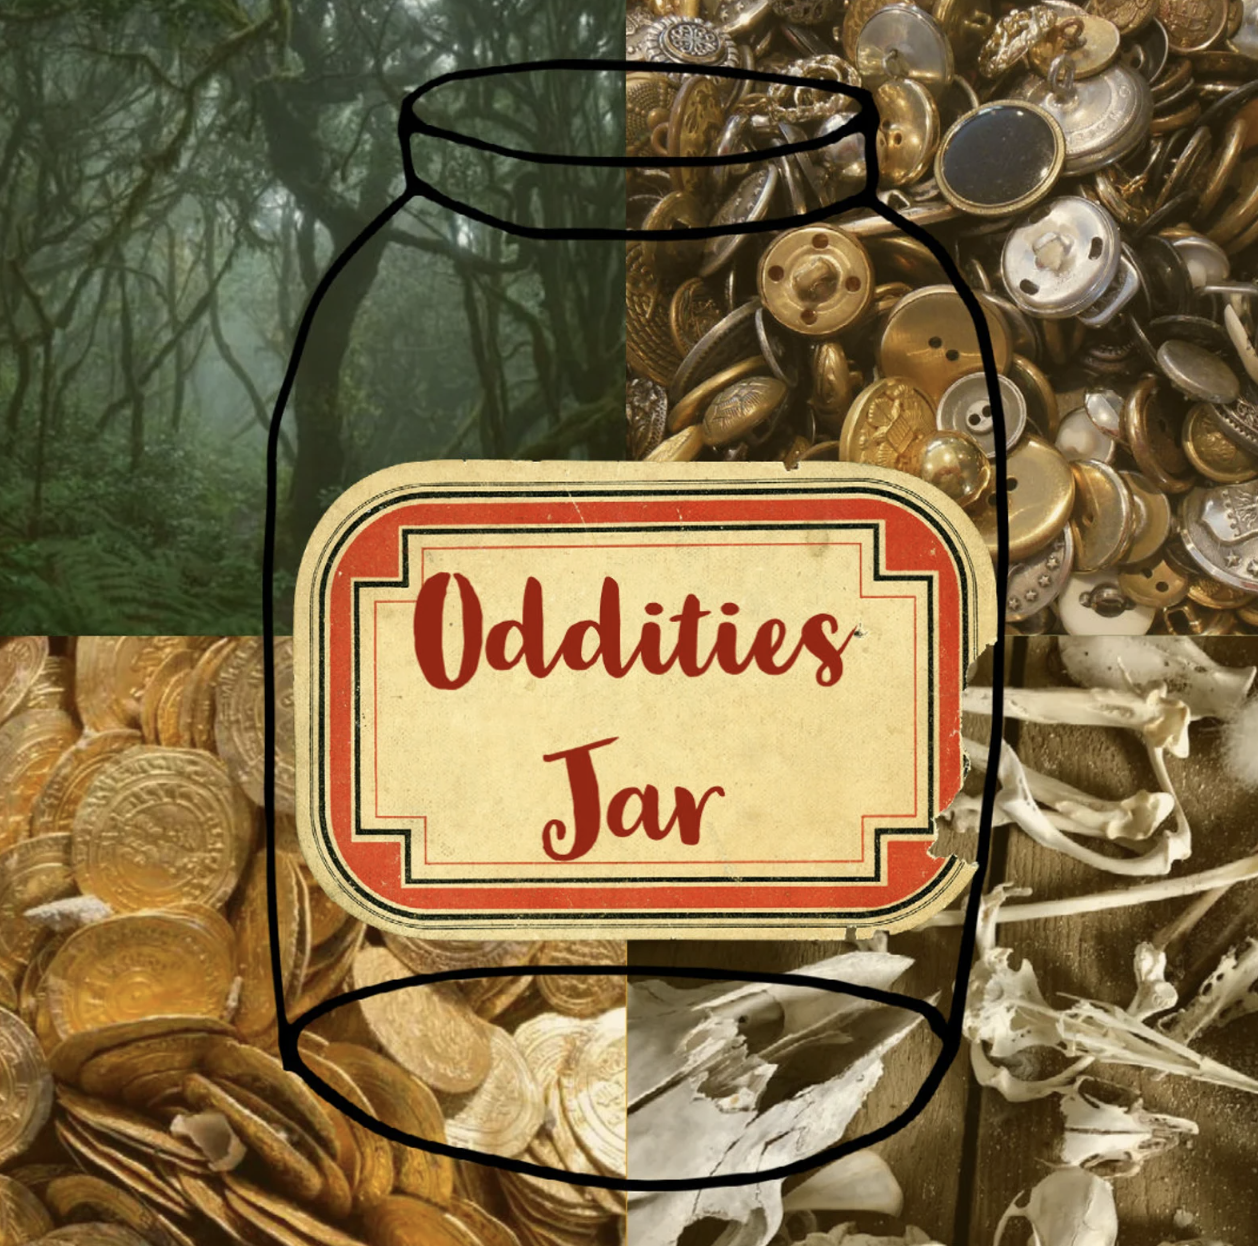 A drawing of a jar with a label "Oddities Jar". In the background are images of coins, buttons, creepy trees, and small animal bones. 